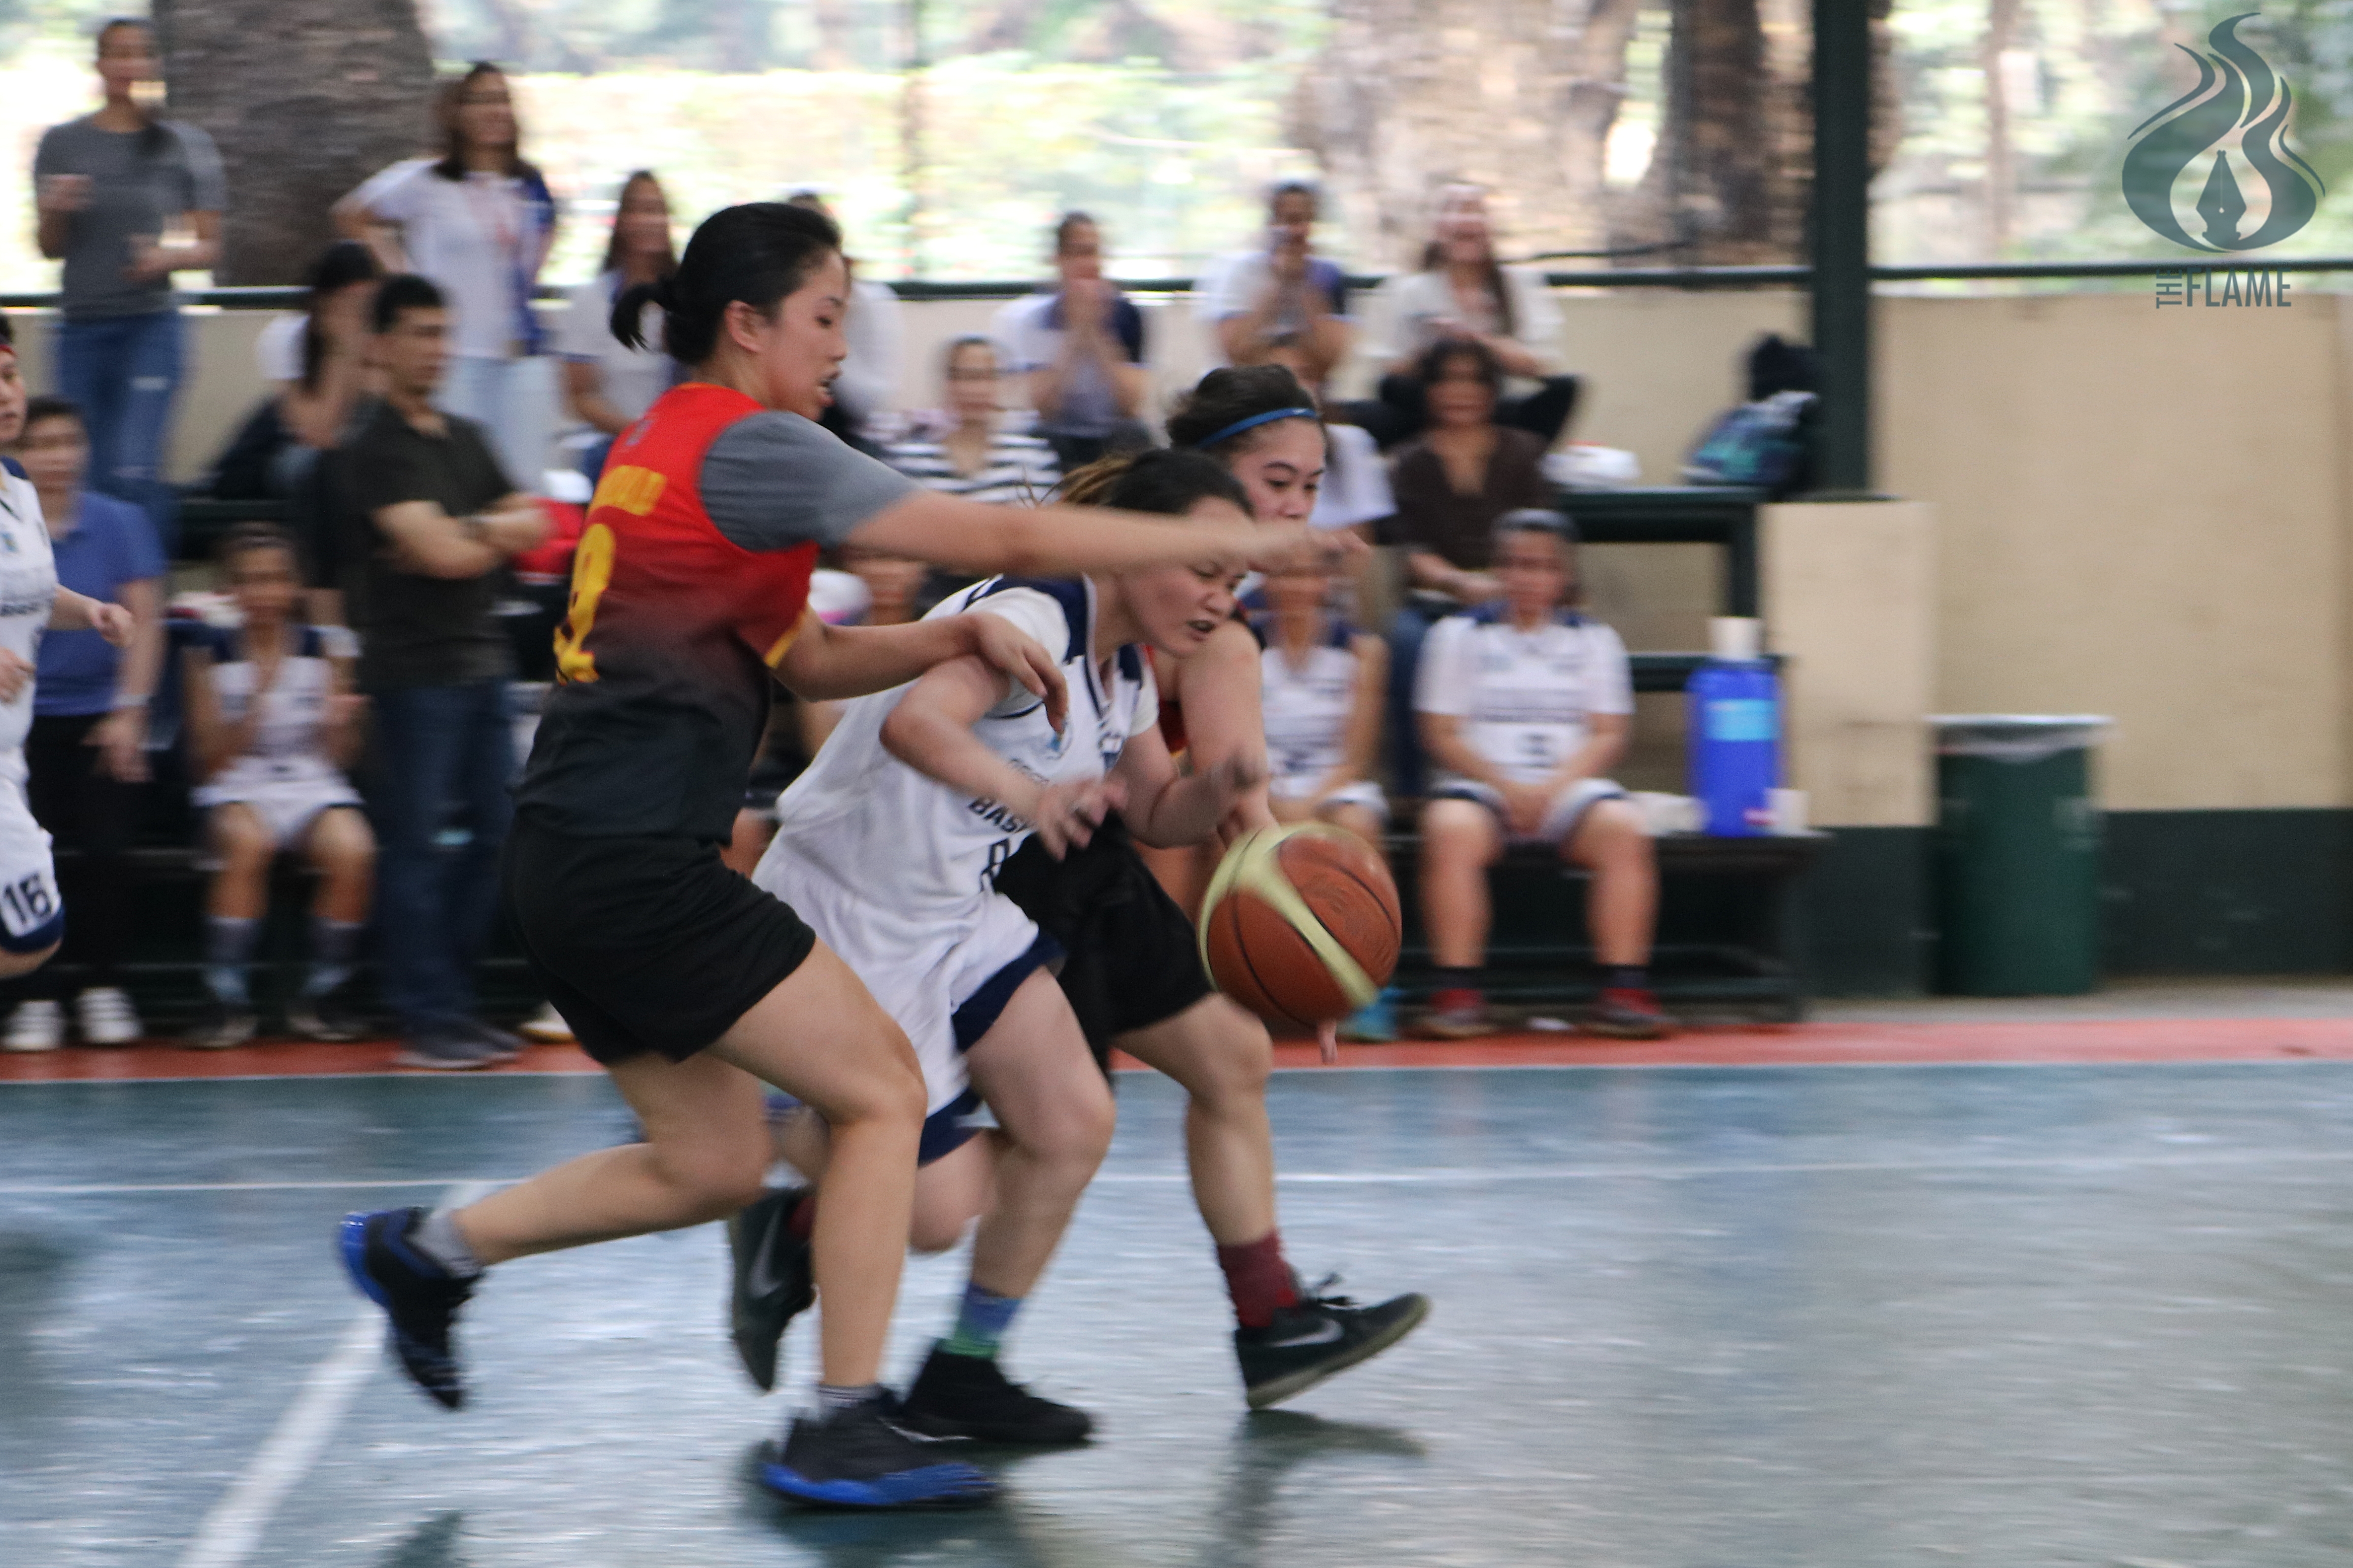 AB Women’s bows to Educ in opening game